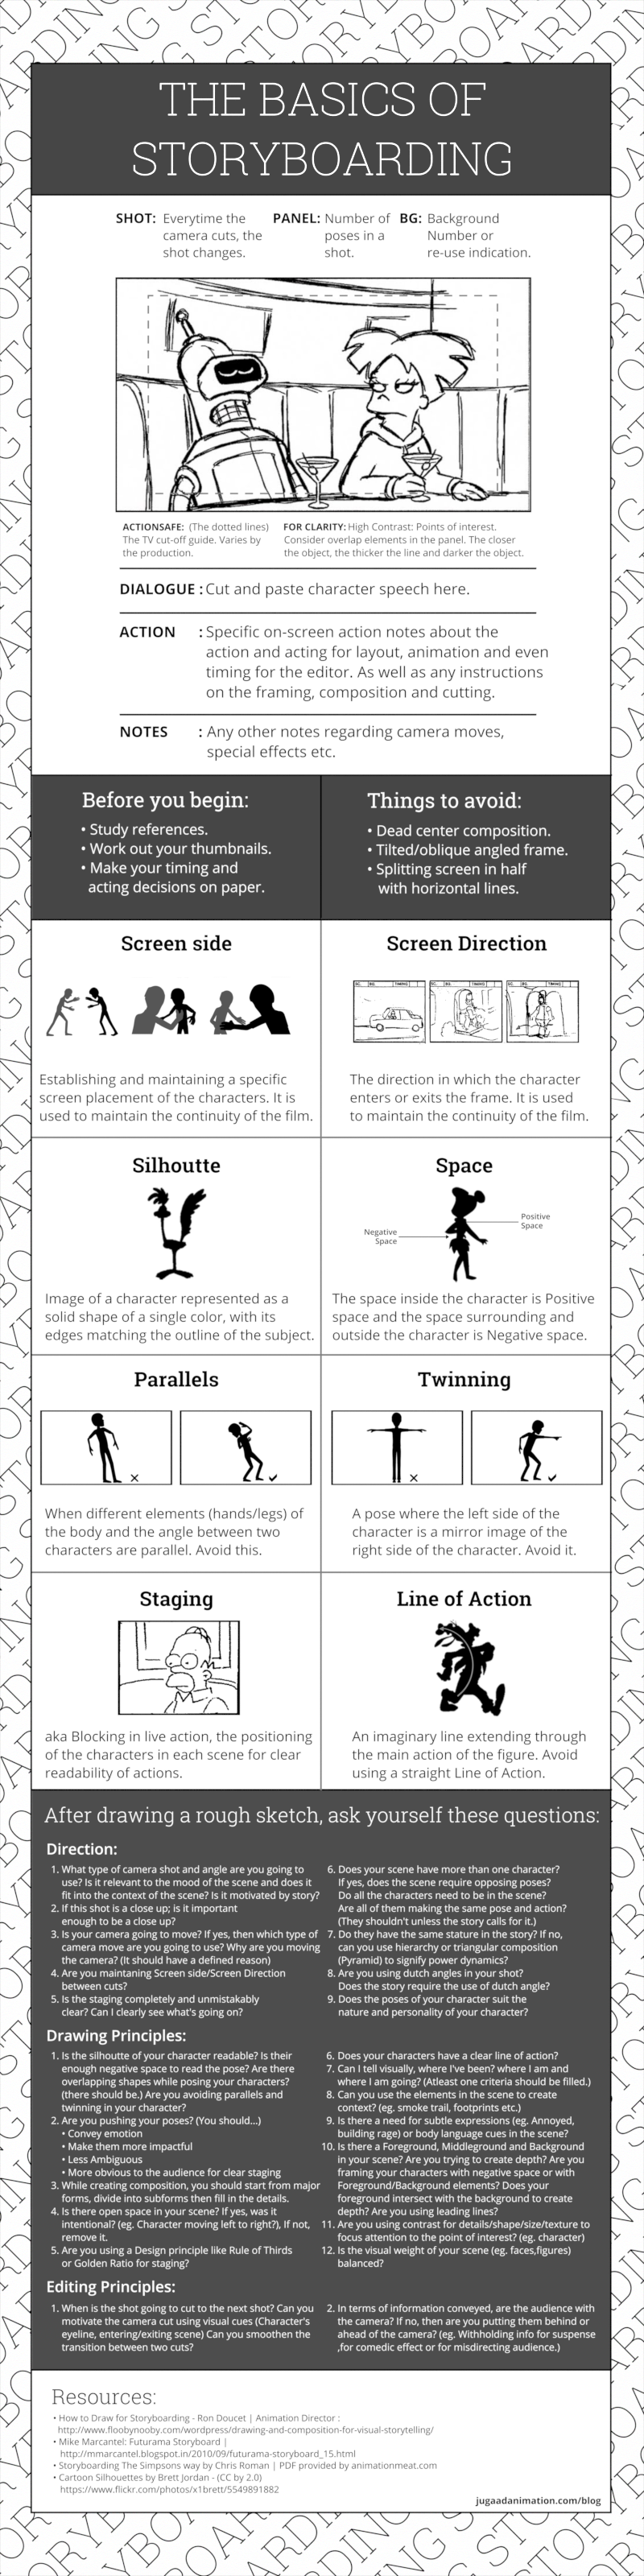 Action Plan Info Example Storyboard By Infographic Templates Riset 0869